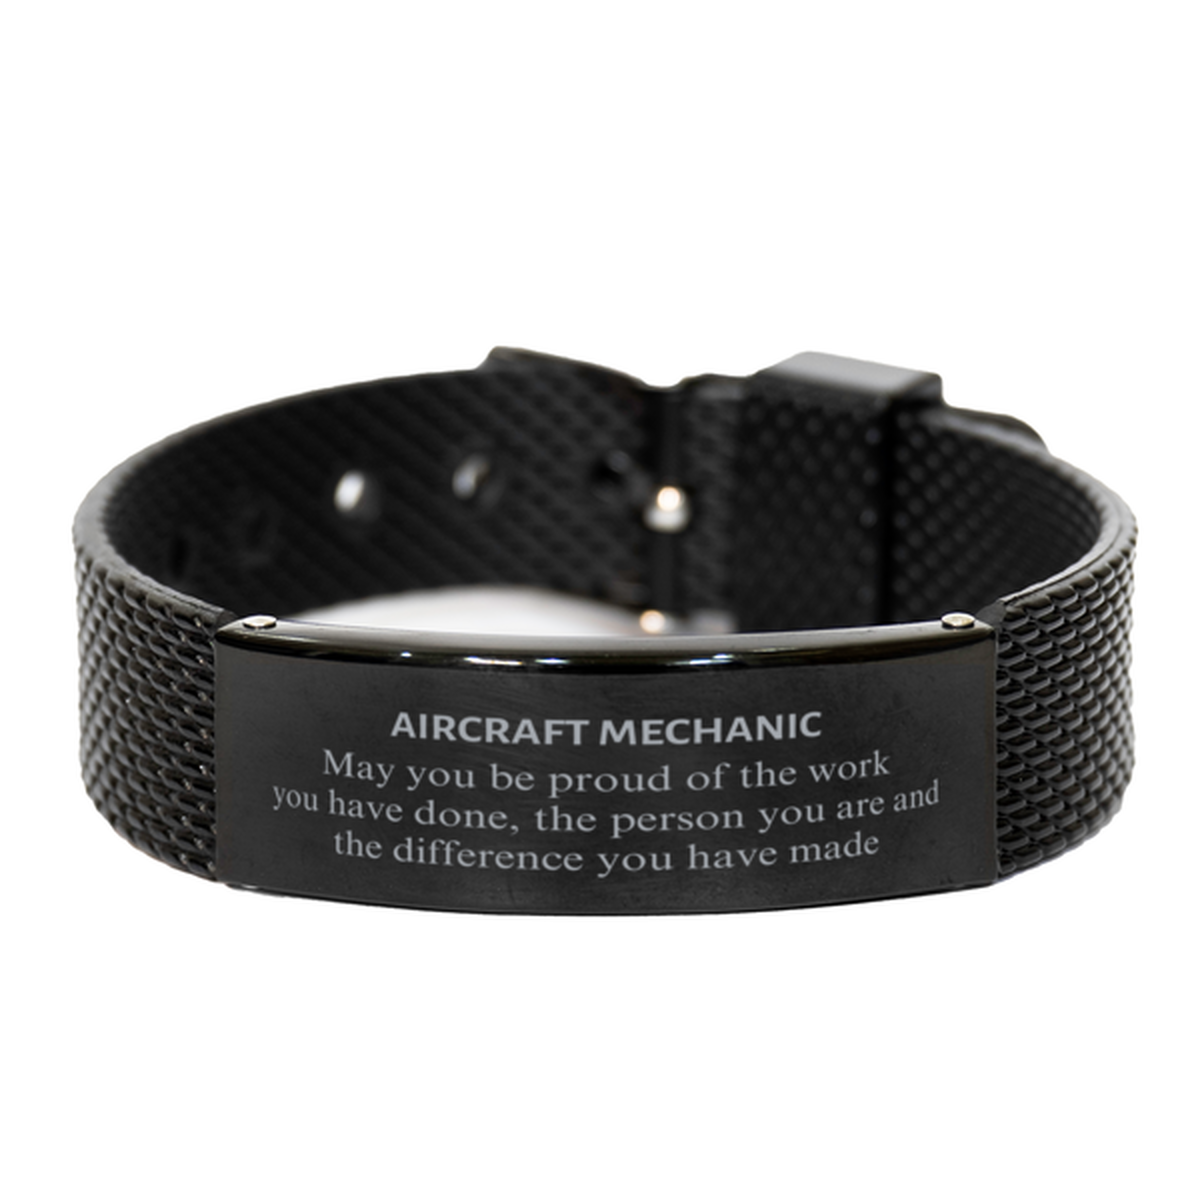 Aircraft Mechanic May you be proud of the work you have done, Retirement Aircraft Mechanic Black Shark Mesh Bracelet for Colleague Appreciation Gifts Amazing for Aircraft Mechanic